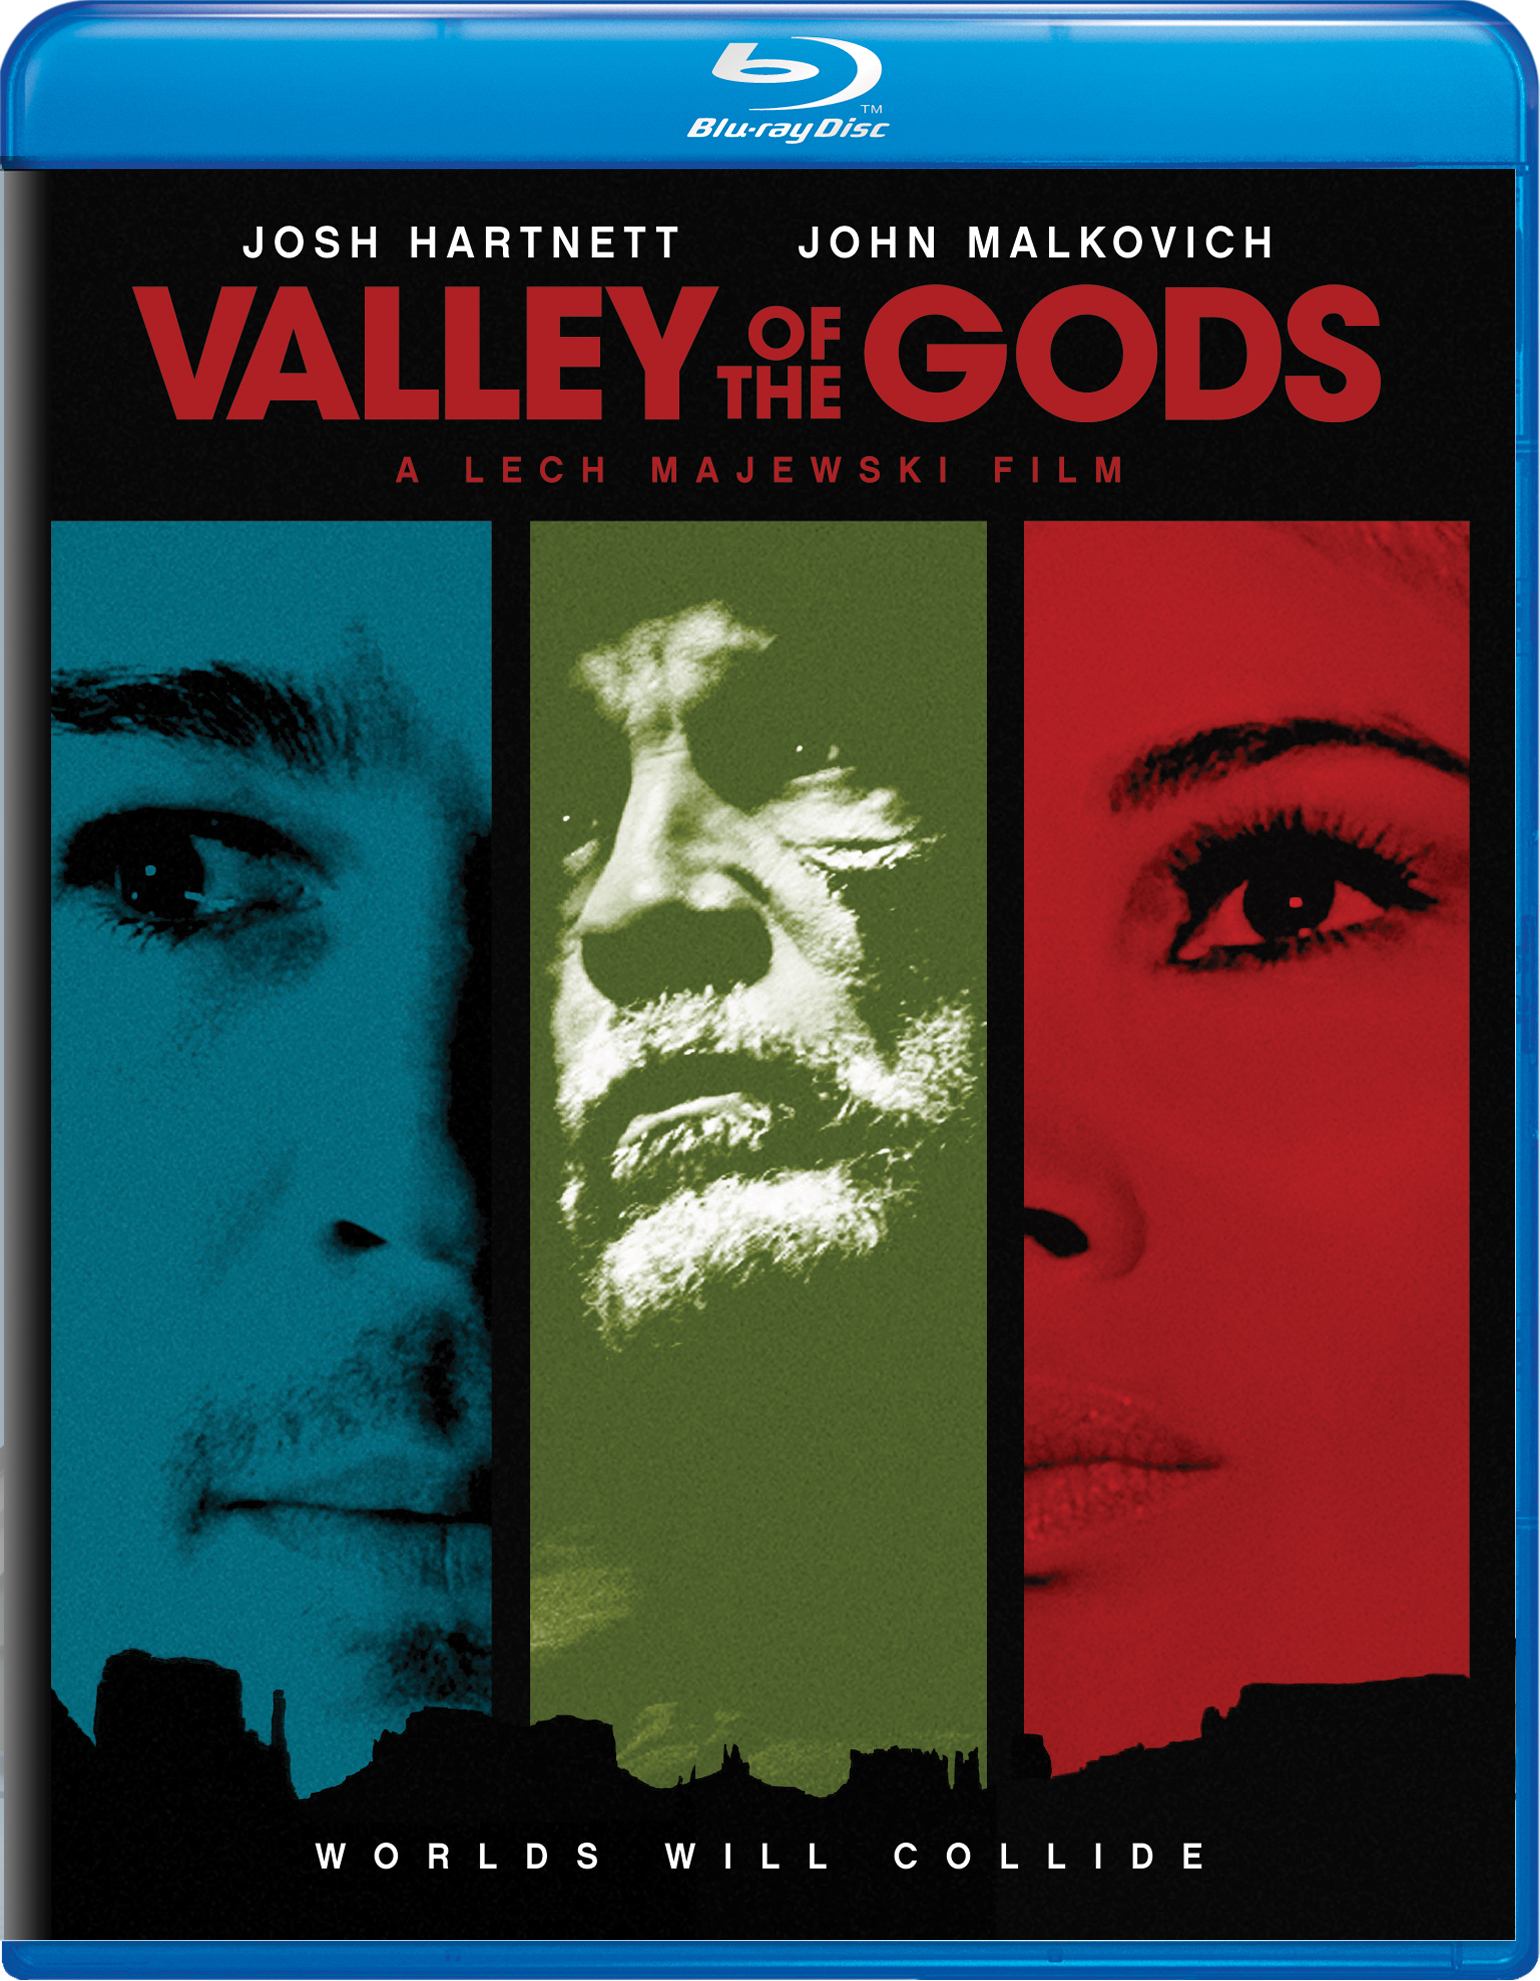 Valley Of The Gods - Blu-ray   - Sci Fi Movies On Blu-ray - Movies On GRUV